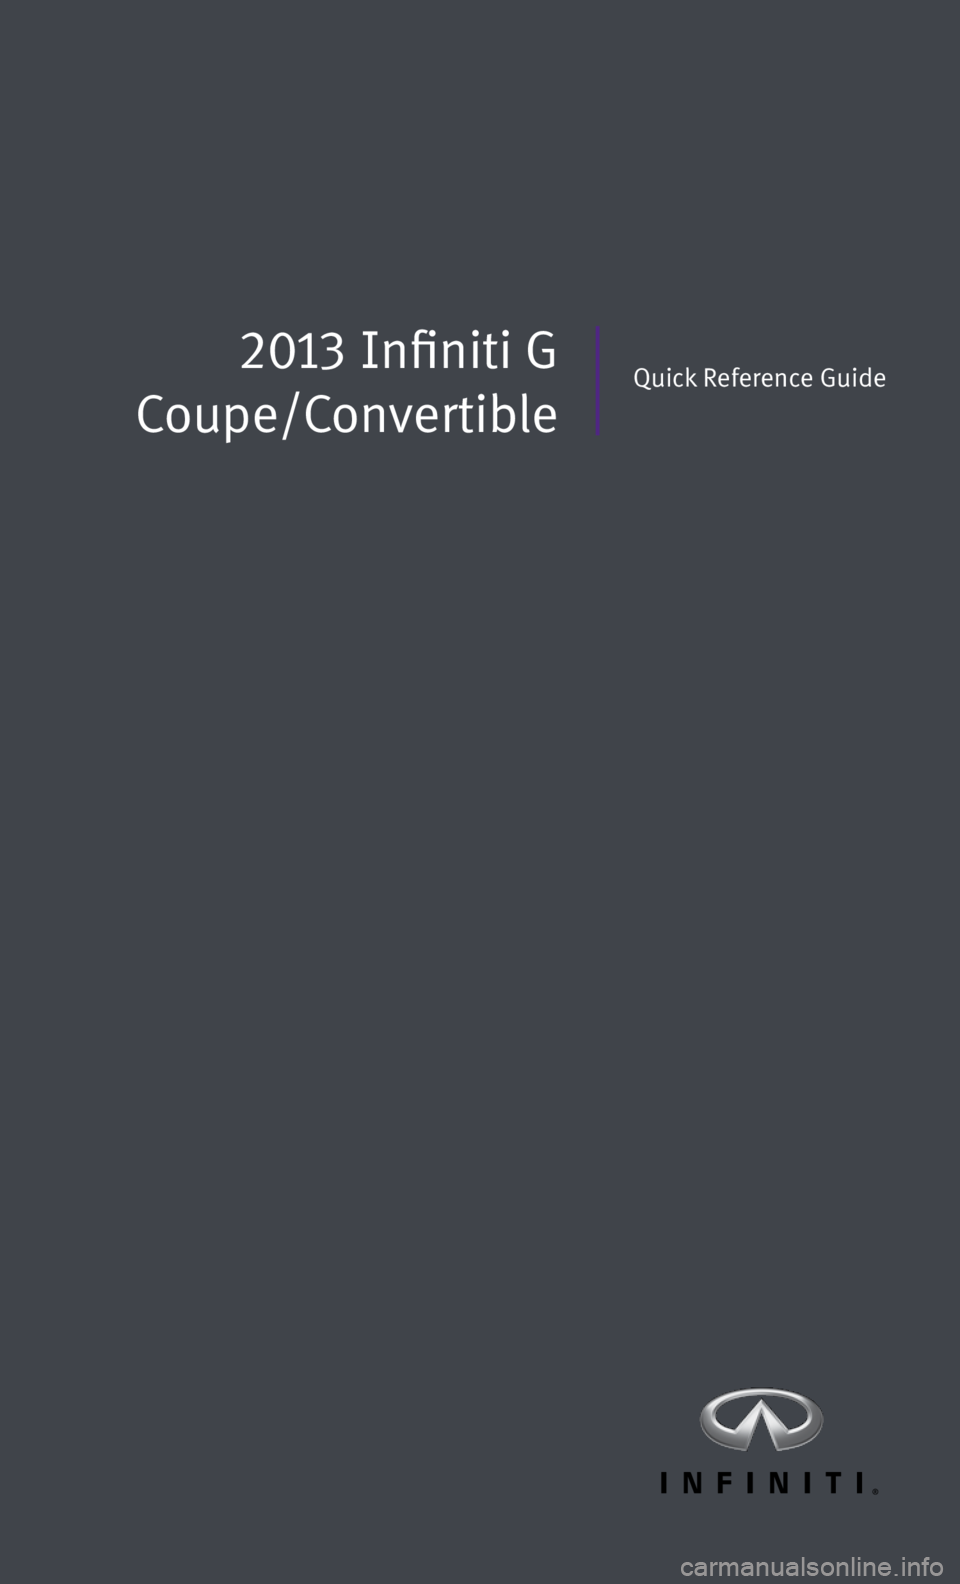 INFINITI G COUPE 2013  Quick Reference Guide Quick Reference Guide2013 Infiniti G 
Coupe/Convertible 